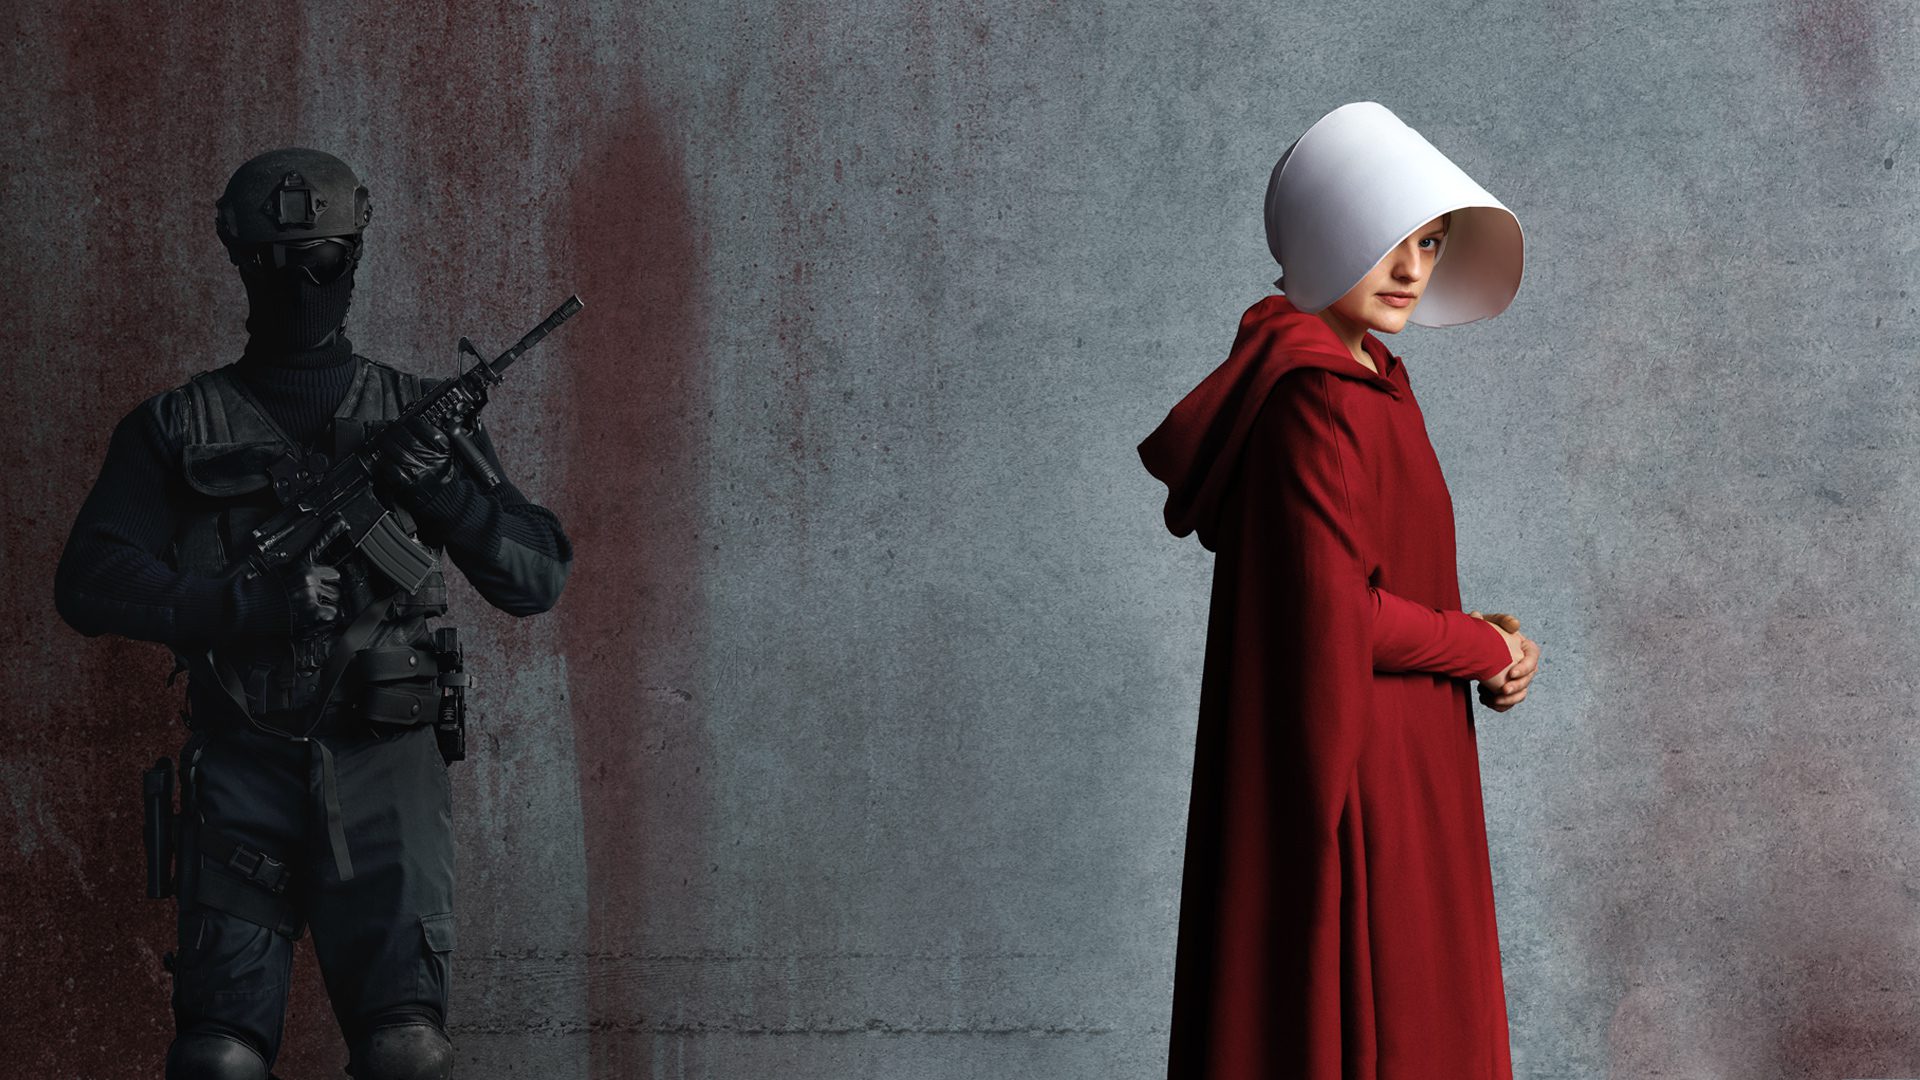 How Well Do You Know The Handmaid’s Tale?